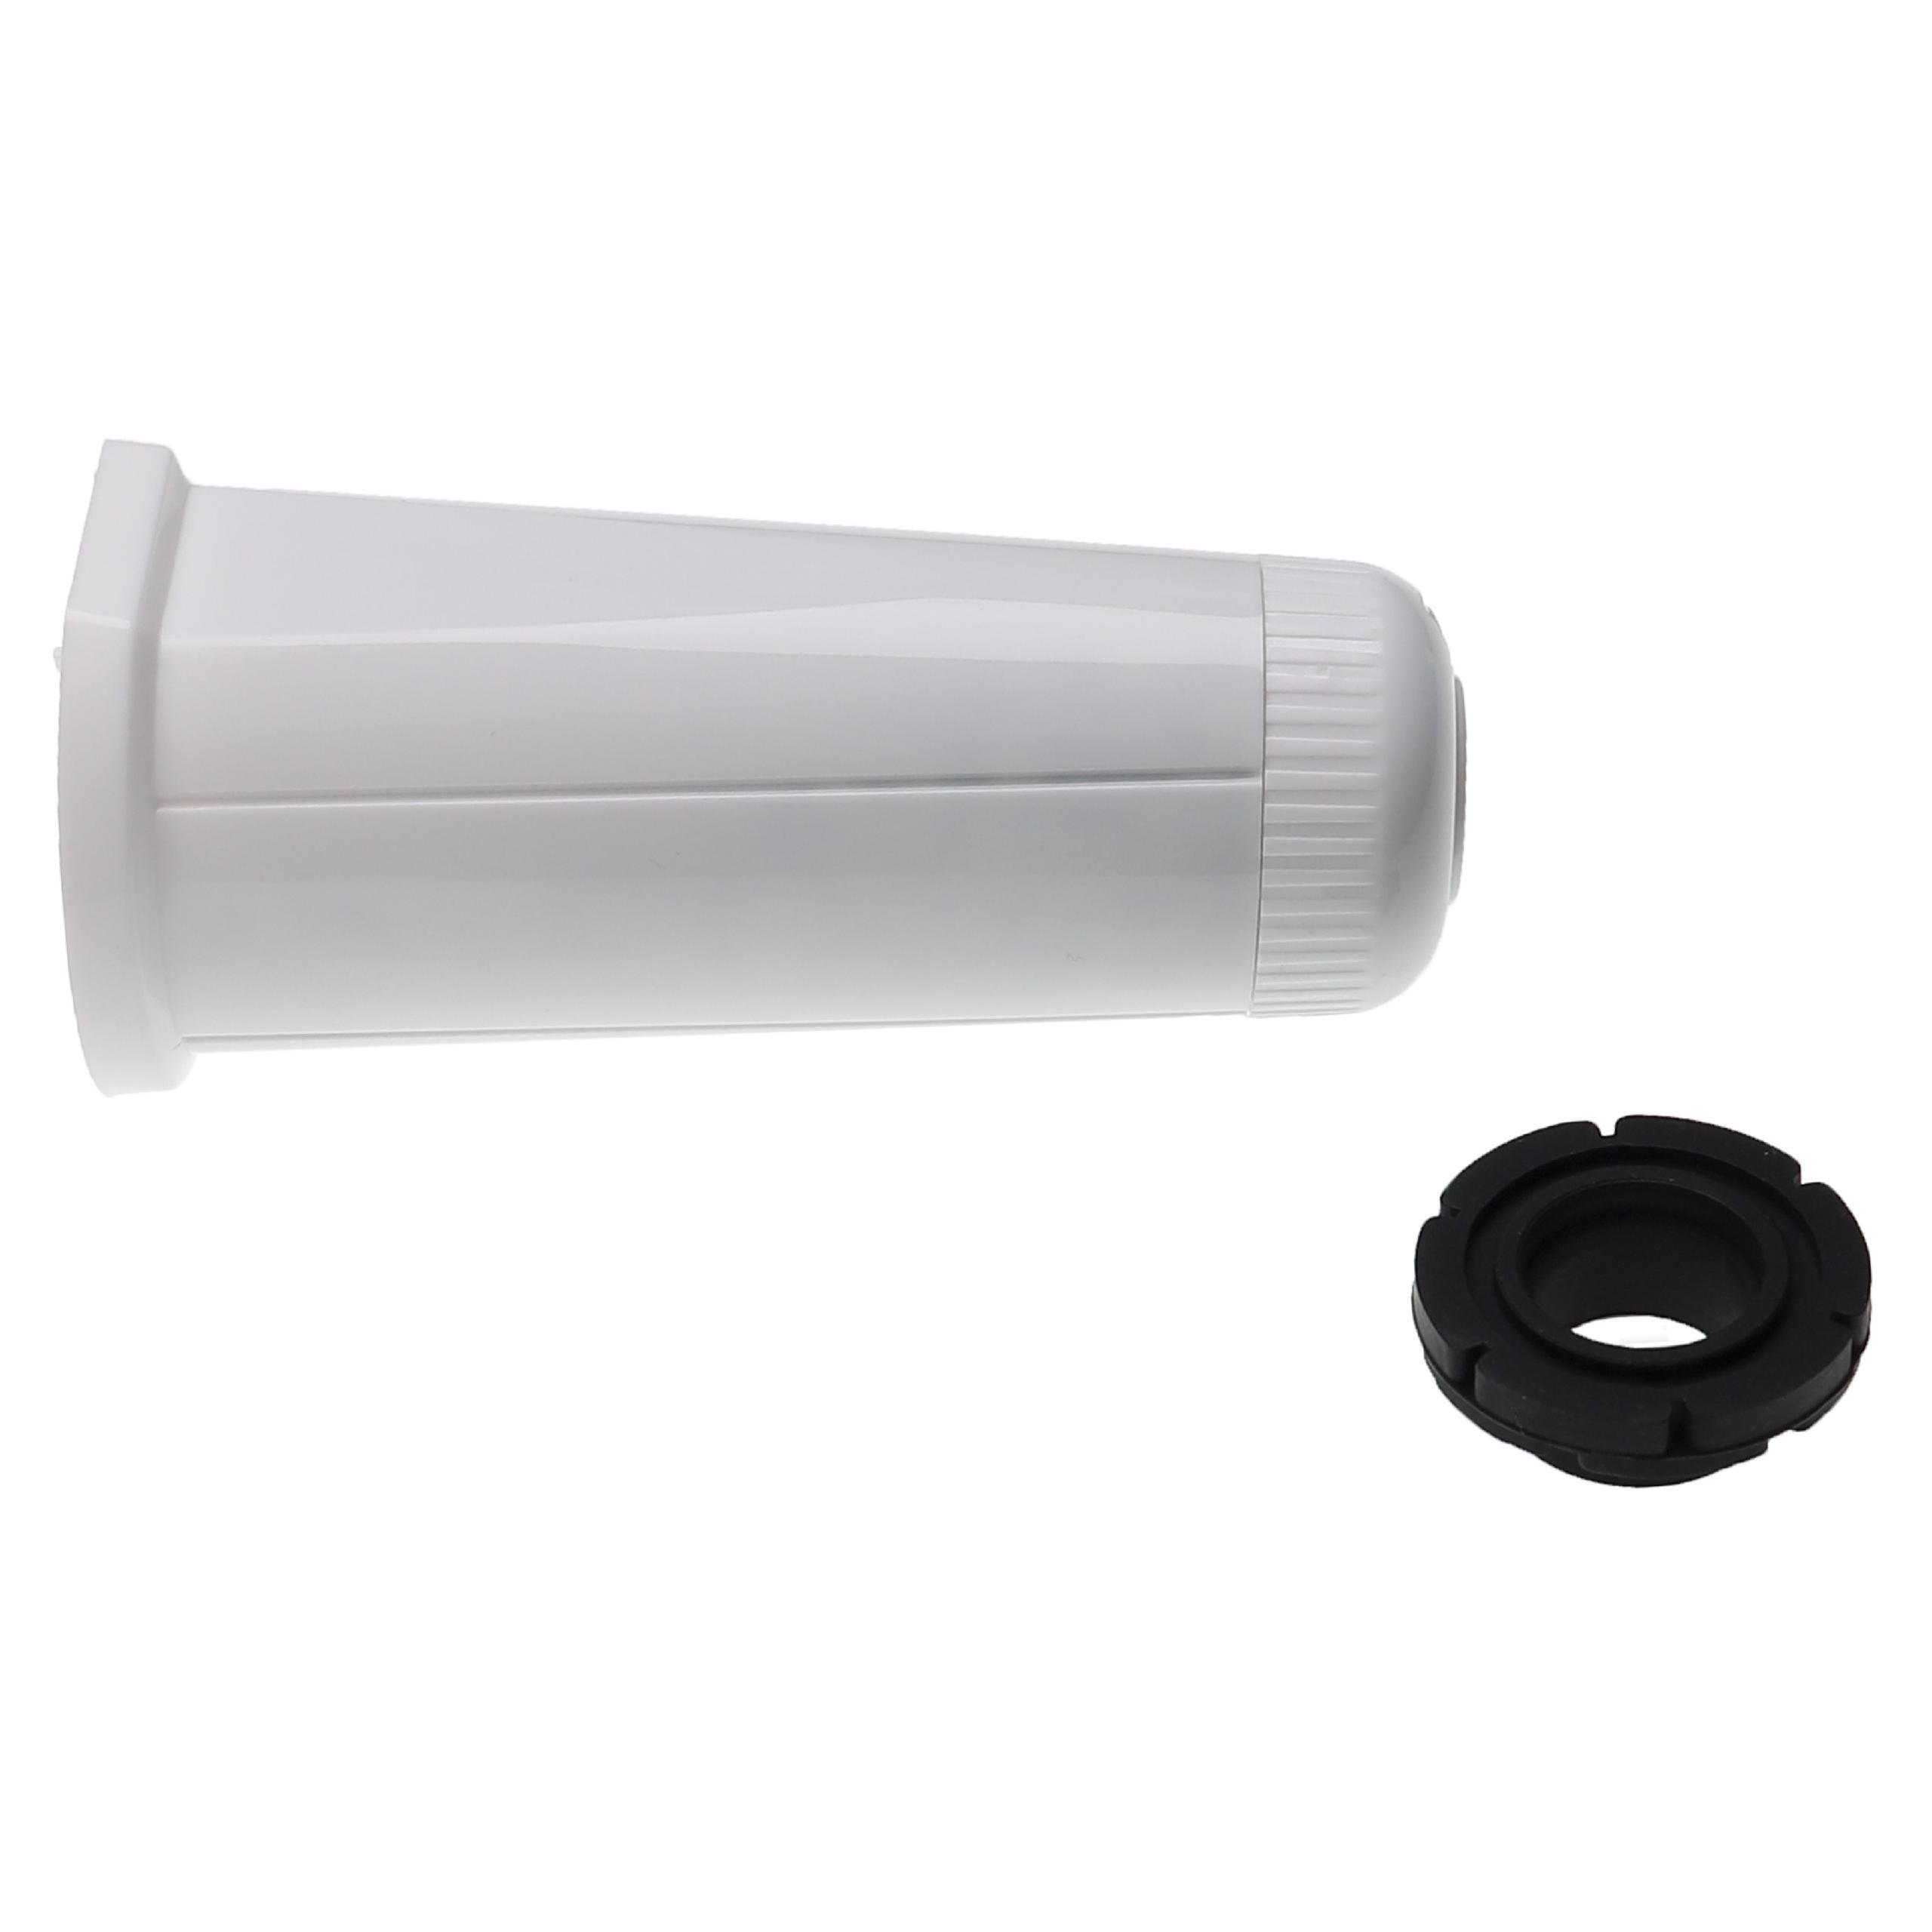 Water Filter replaces Sage BES008 for Breville Coffee Machine etc. - White